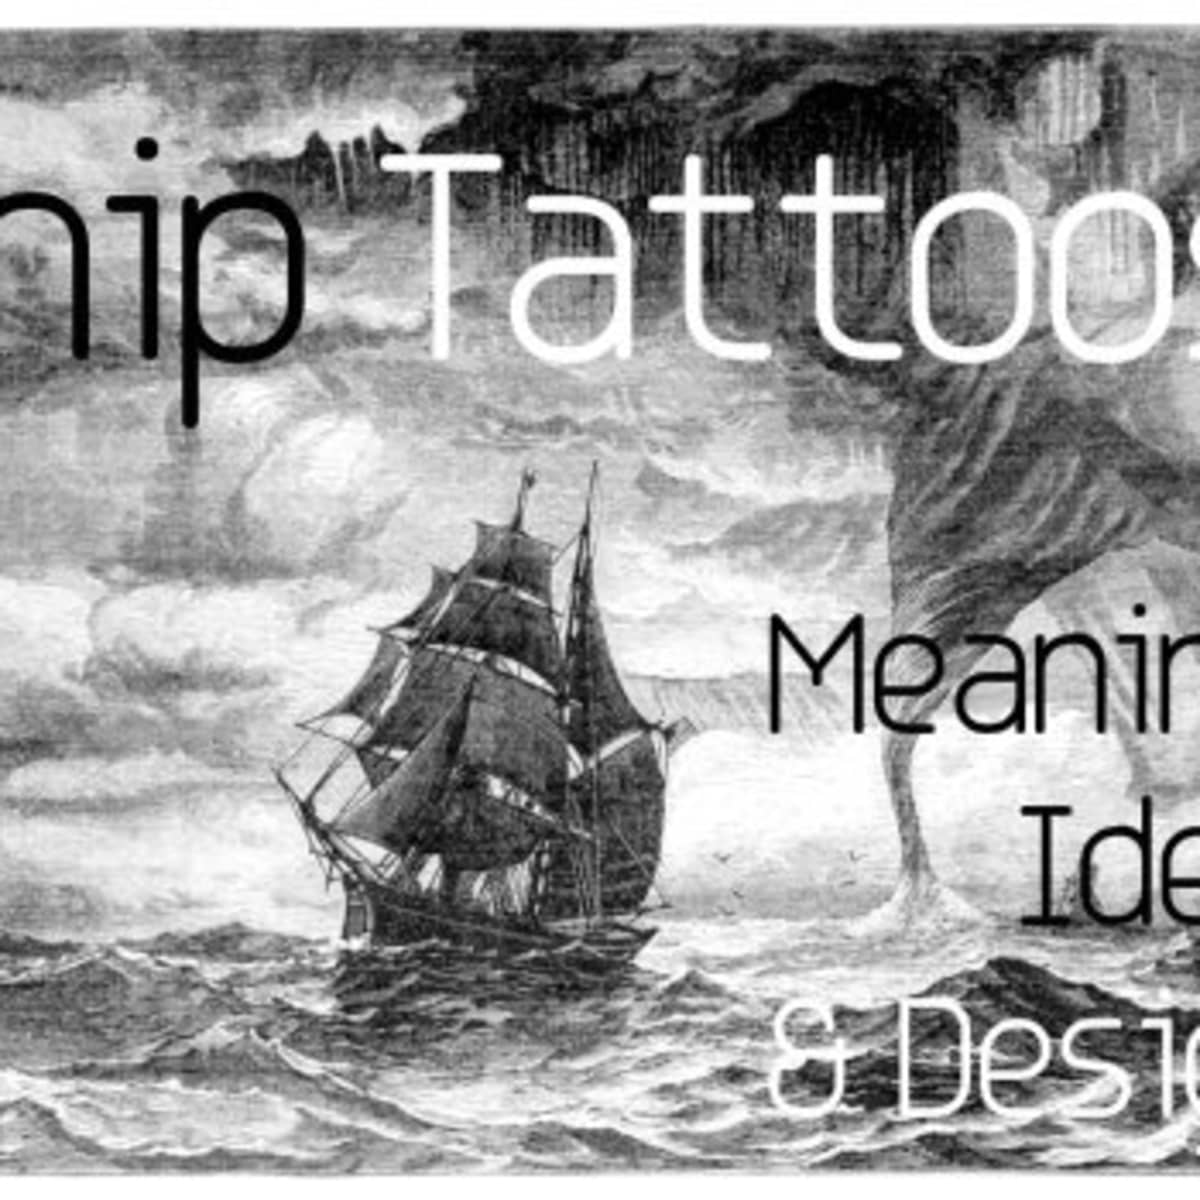 12 Traditional Pirate Ship Tattoo Ideas To Inspire You  alexie